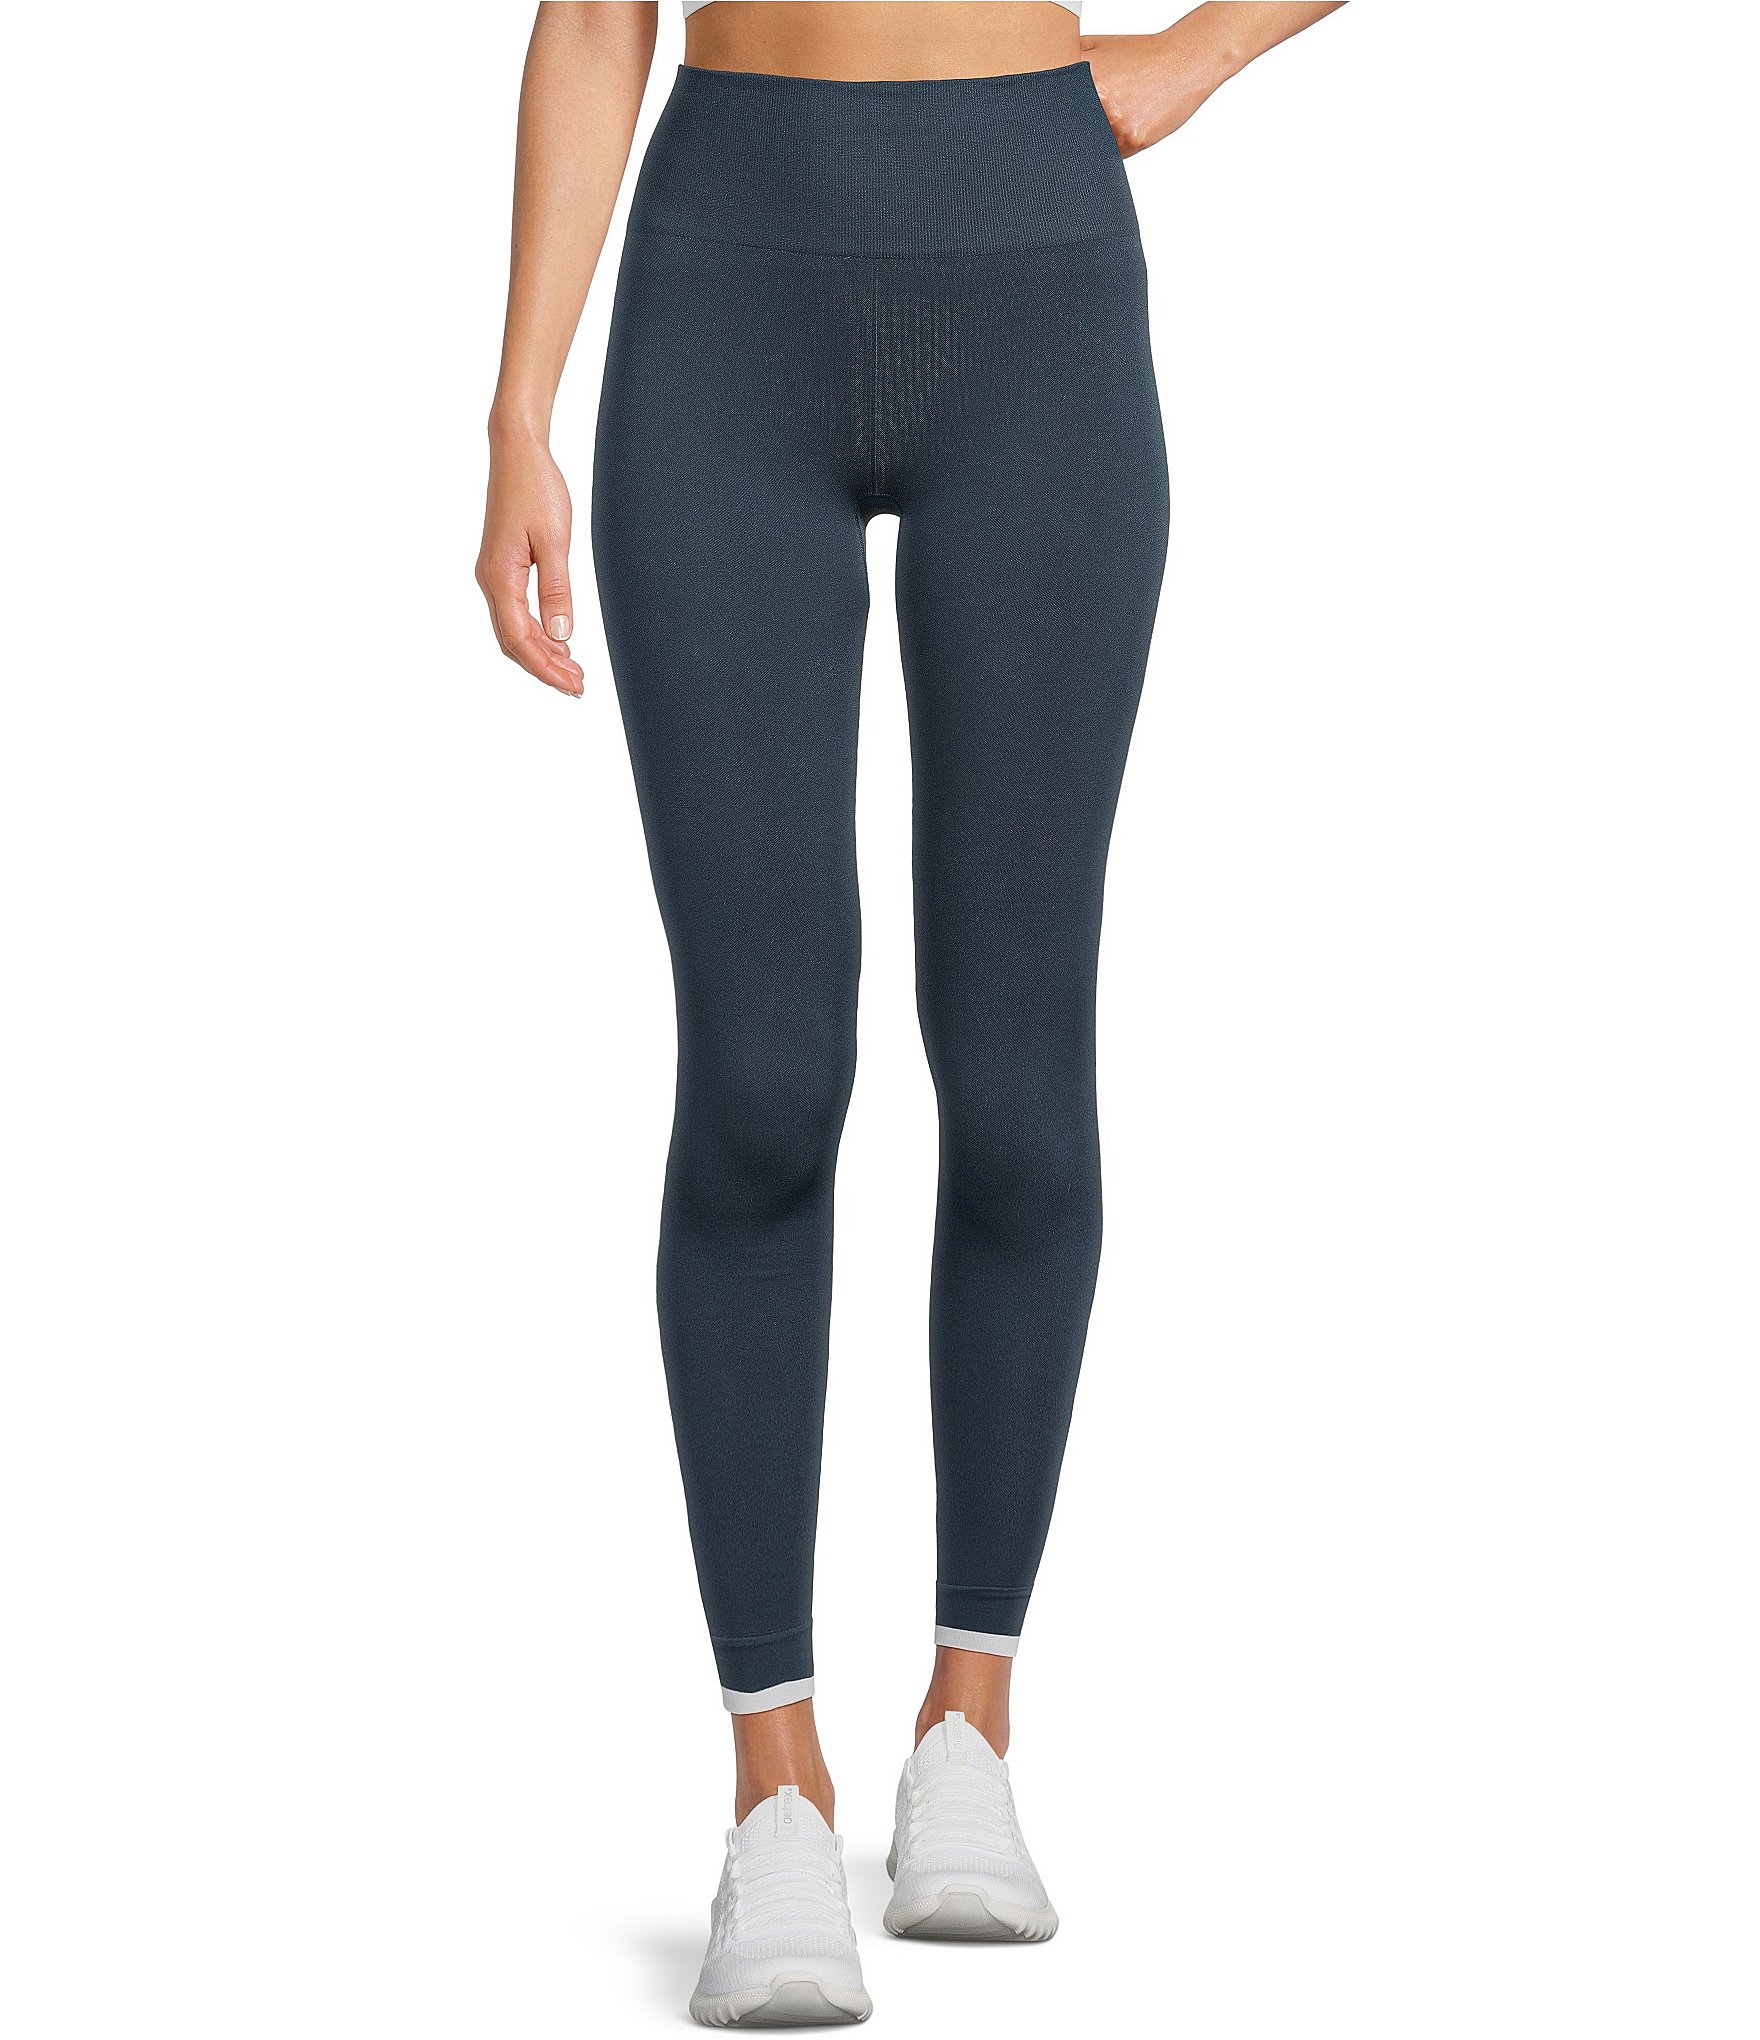 Navy Oxford 25 high-rise jersey leggings, The Upside